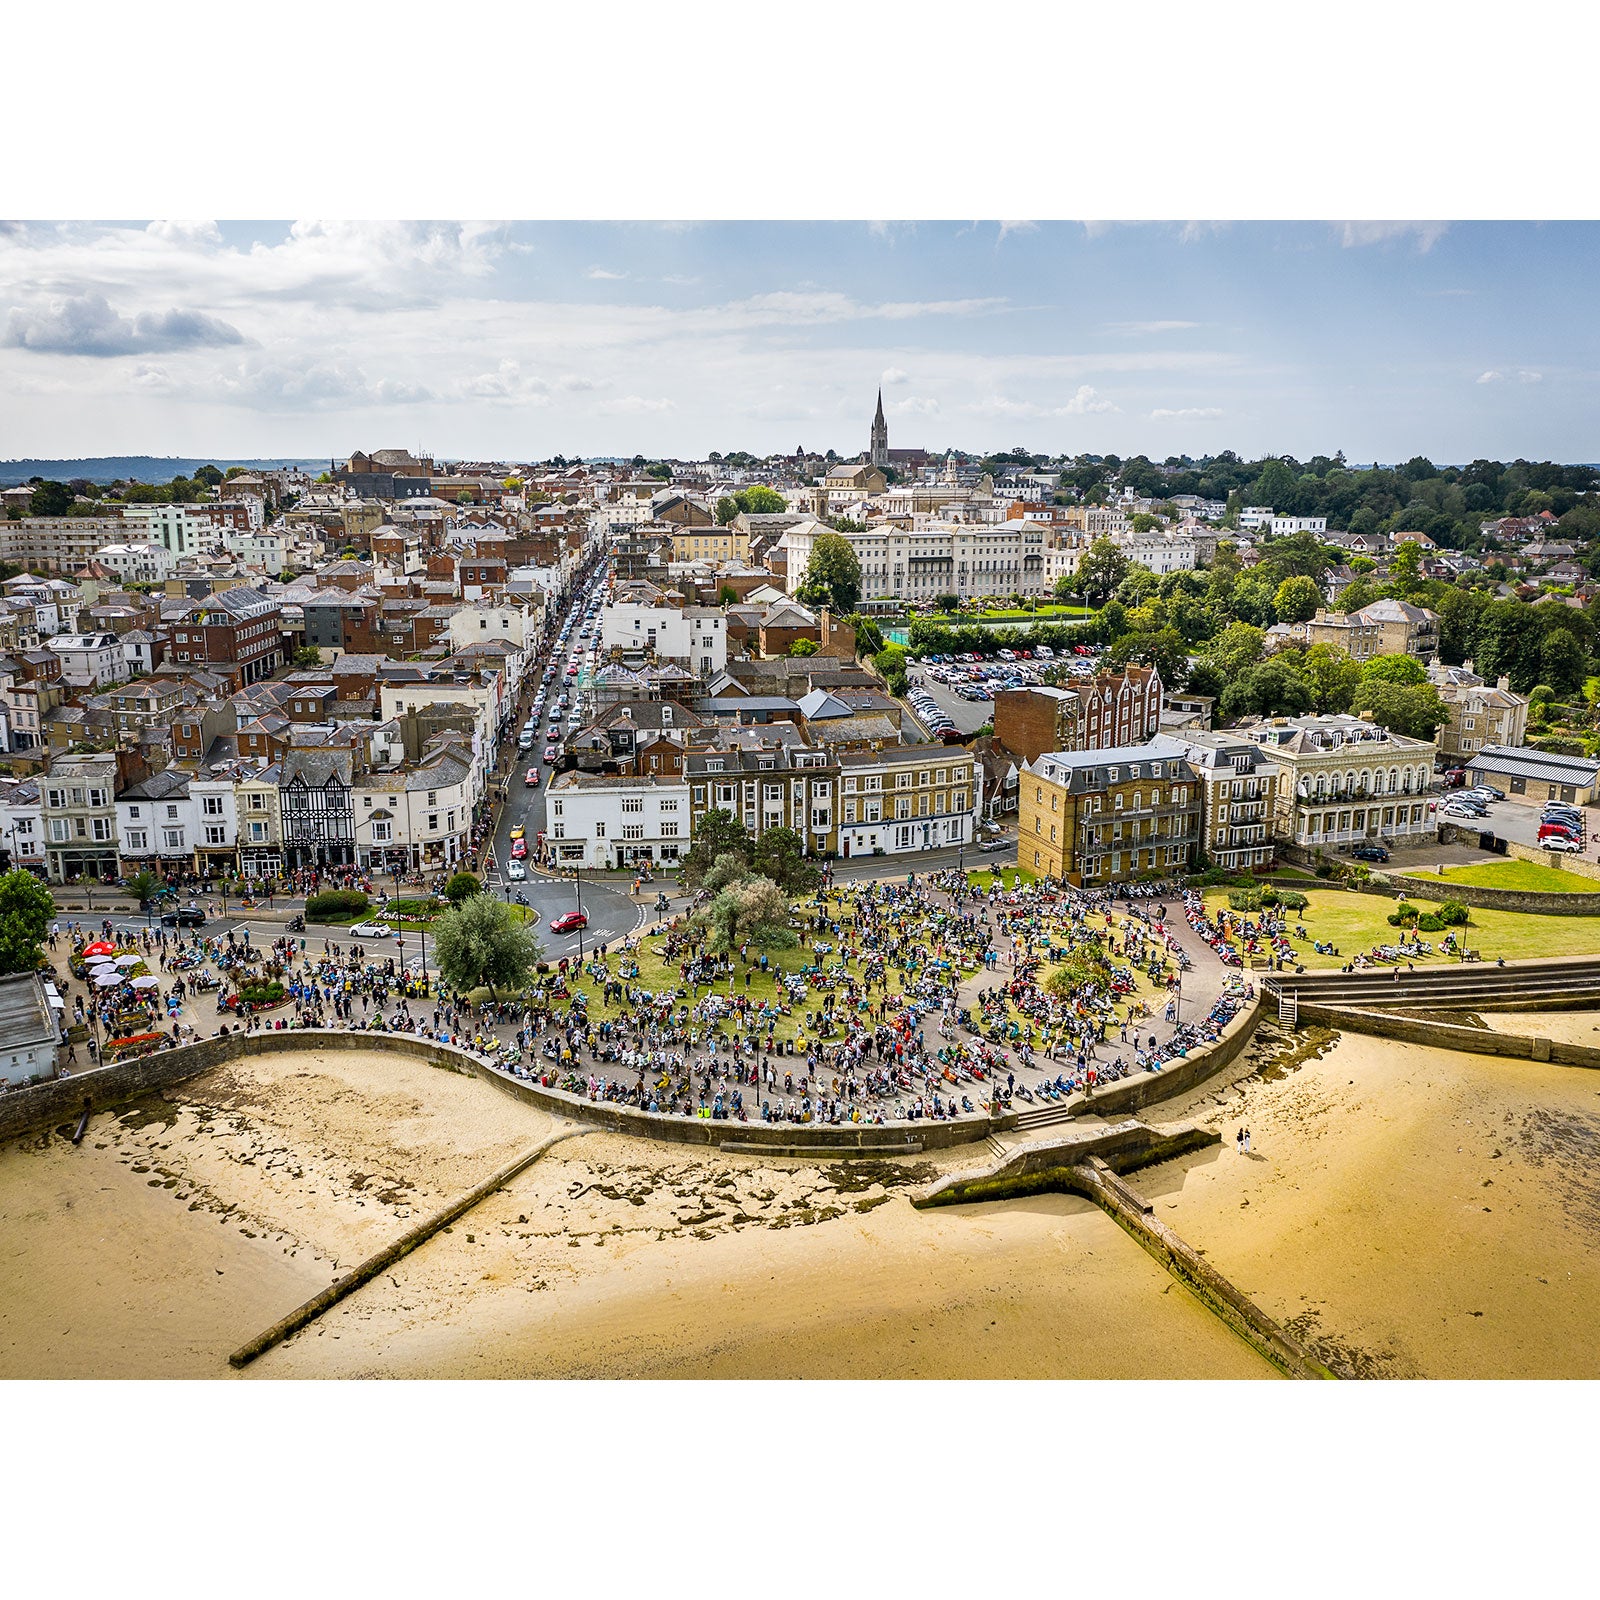 Aerial view of a crowded urban beachfront with a curved promenade from the Scooter Rally, Ryde by Available Light Photography on the Isle of Wight.